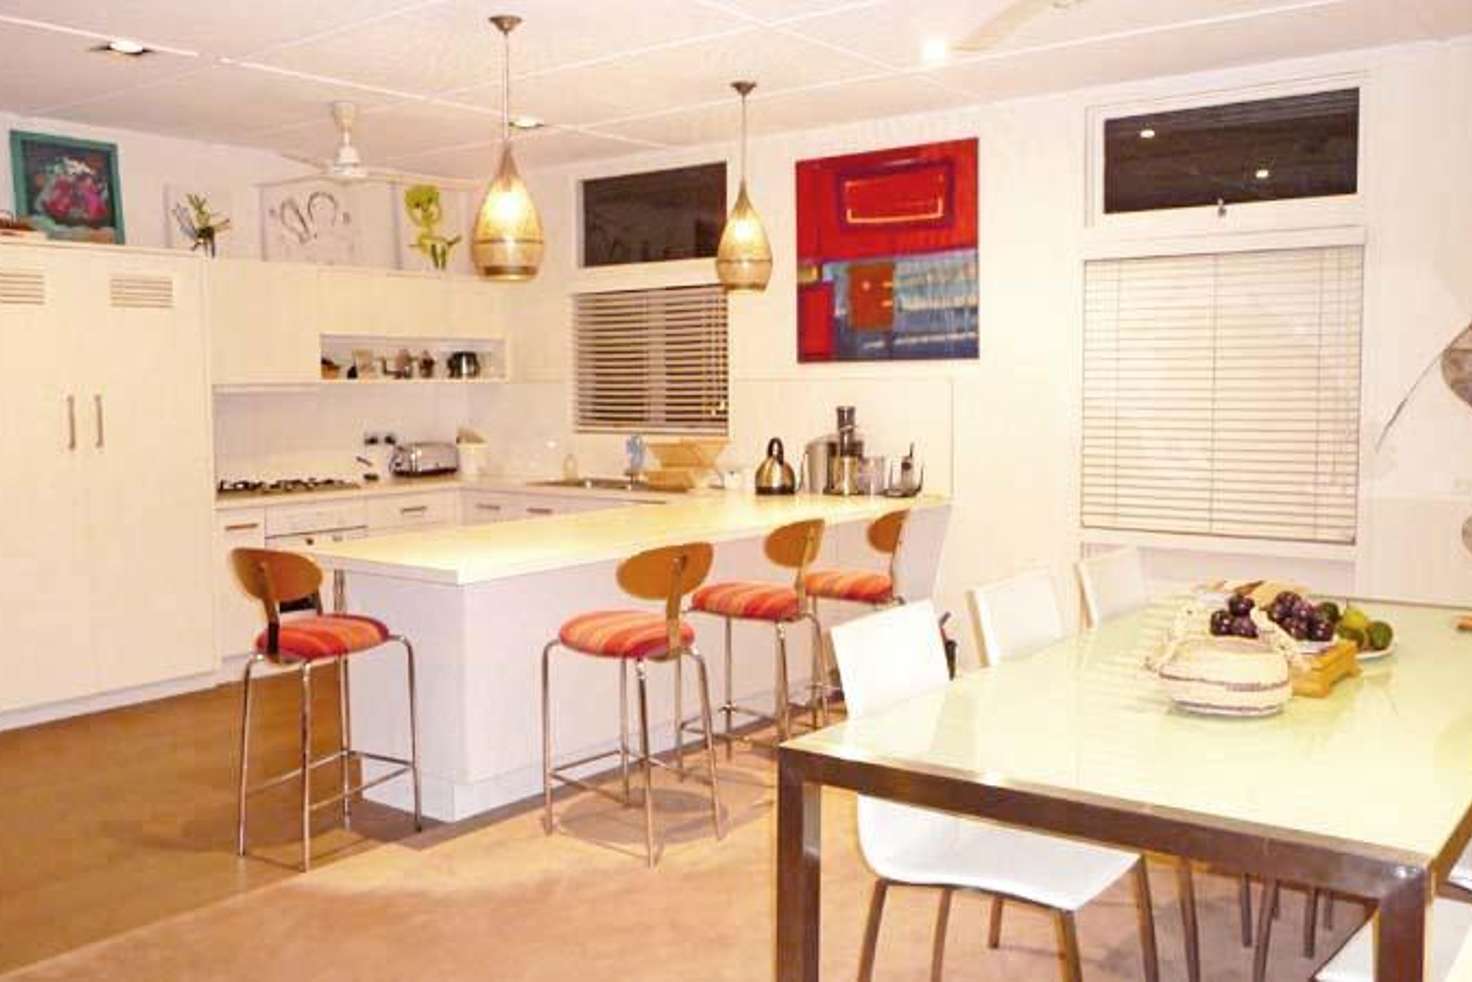 Main view of Homely house listing, 6 Anne Street, Broome WA 6725